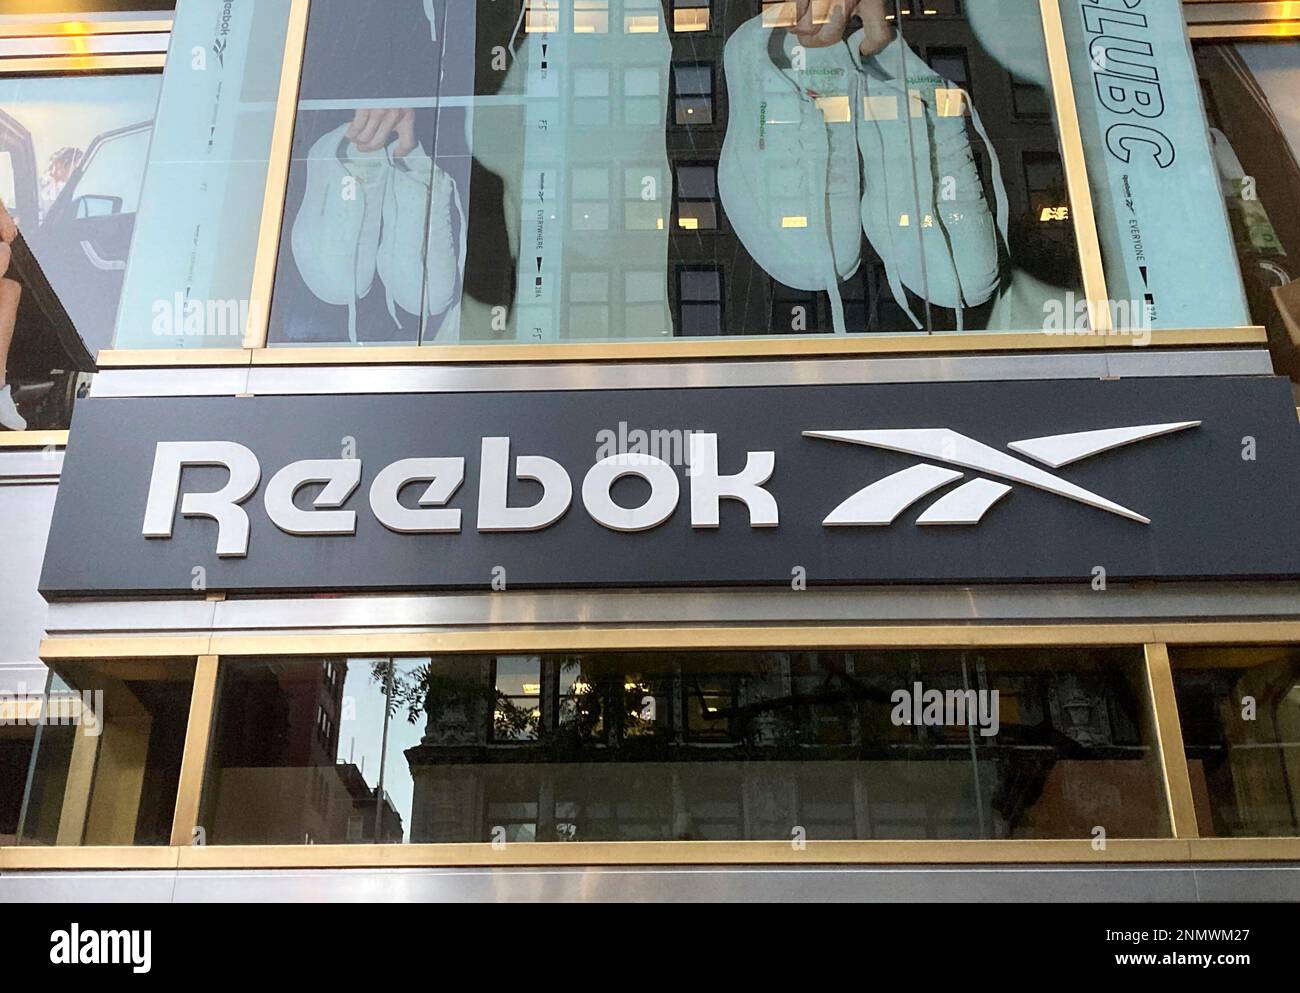 AUGUST 12th 2021: Adidas sells Reebok to Authentic Brands Group for $2.5  billion. - File Photo by: zz/STRF/STAR MAX/IPx 2020 11/4/20 Businesses and  industry in Manhattan, New York City on November 4, 2020 during the  worldwide coronavirus ...